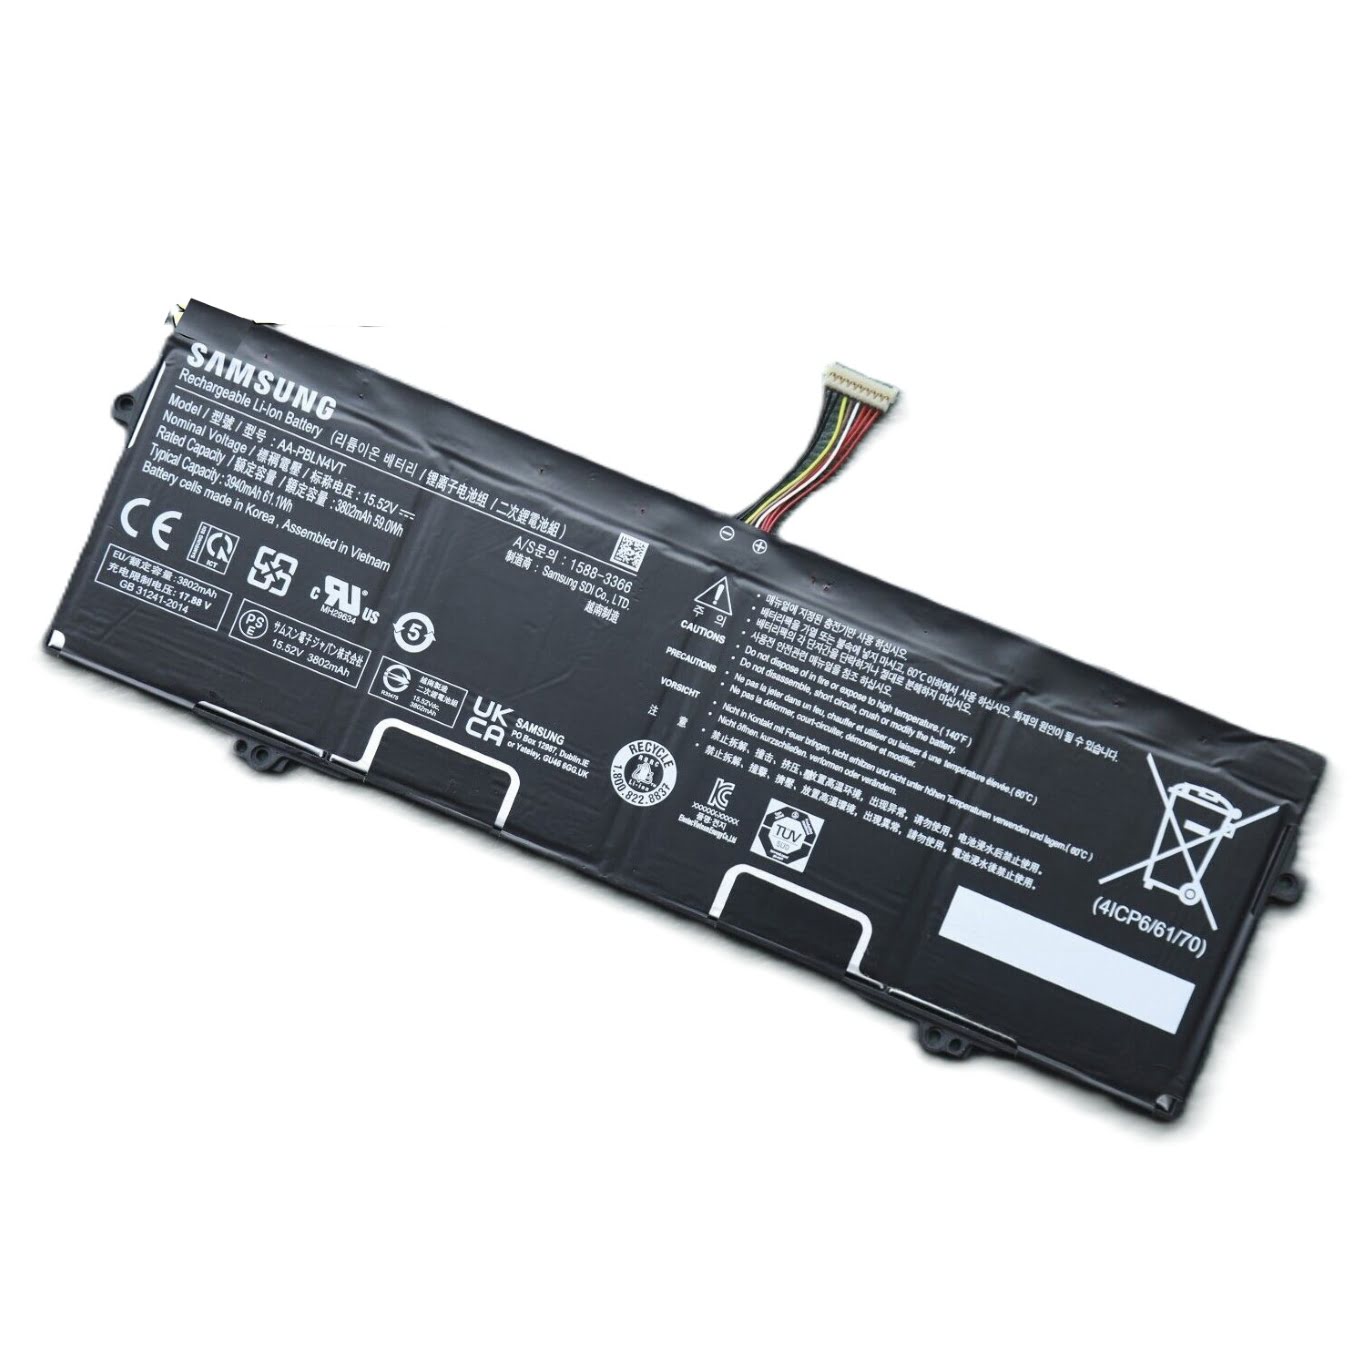 AA-PBLN4VT replacement Laptop Battery for Samsung Galaxy Book2 360 13, Galaxy Book2 360 NP730QED-KA1BE, 15.52v, 3802mah / 59wh, 4 cells